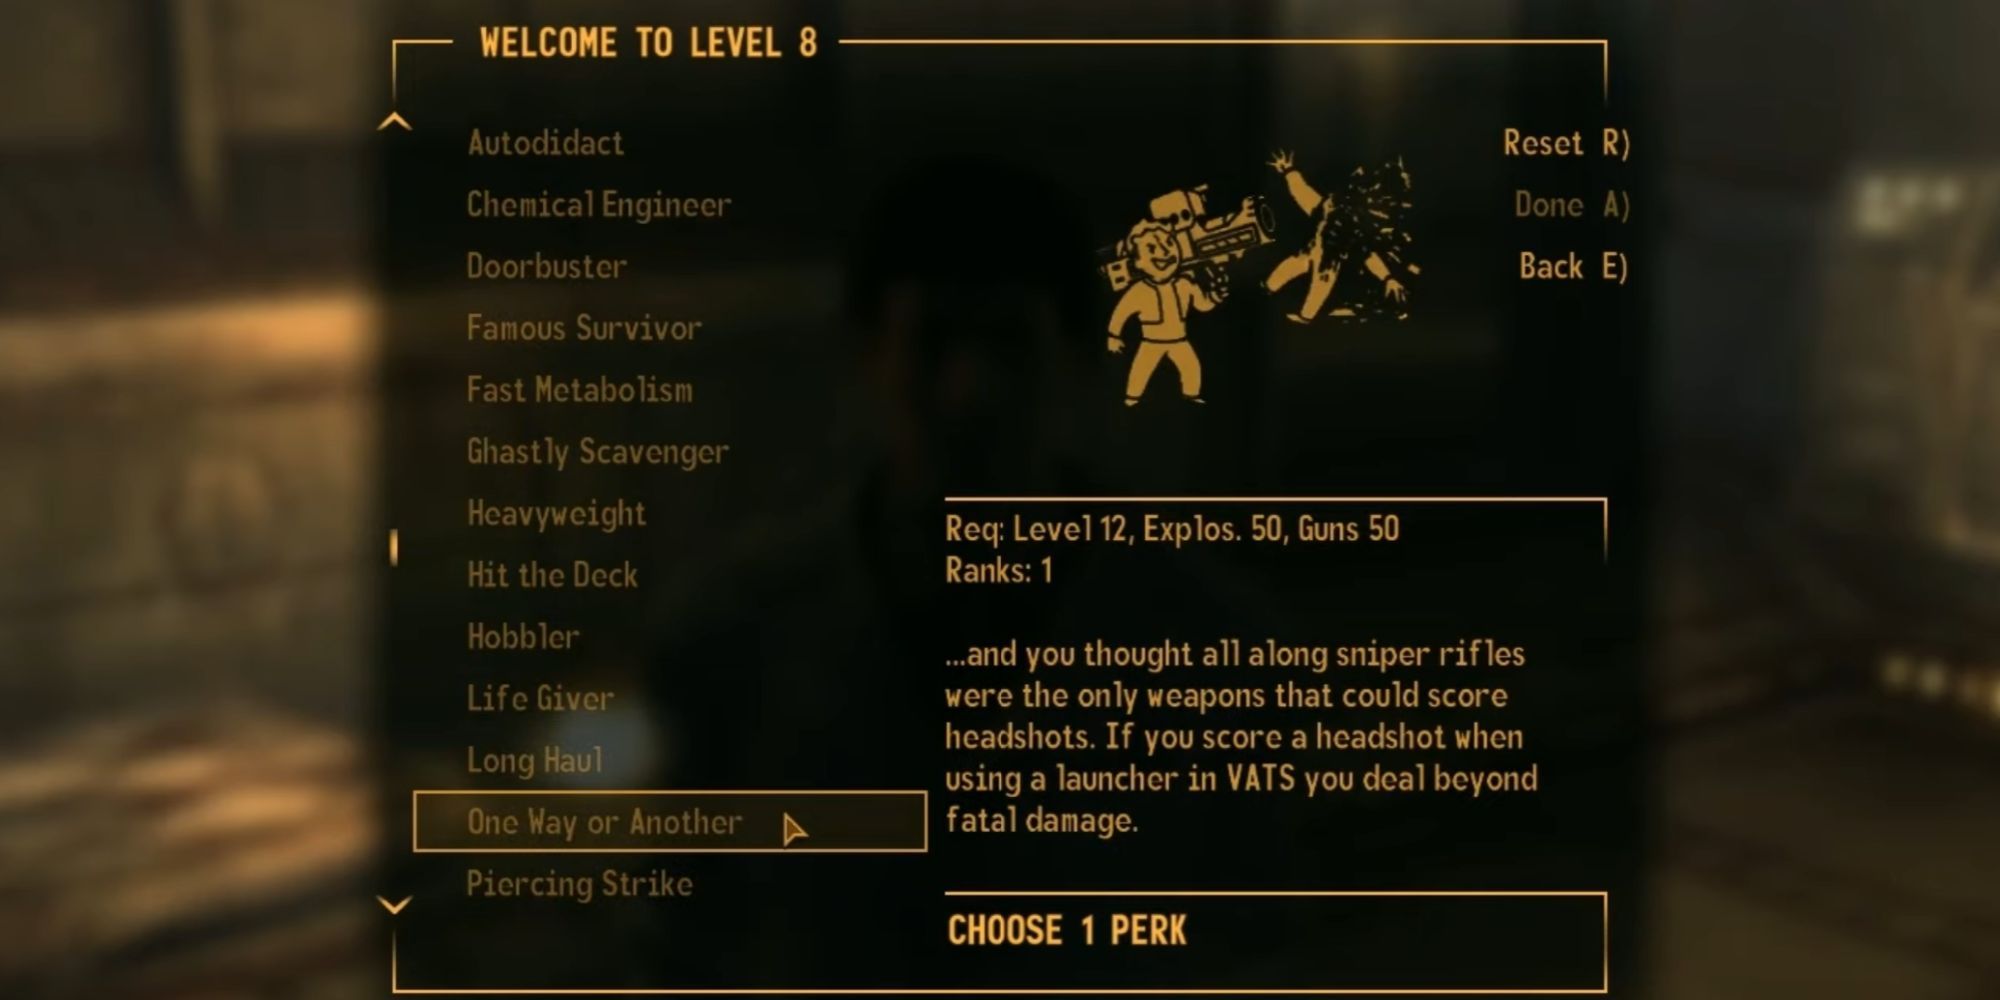 New Vegas One Way Or Another Perk In Level Up Menu